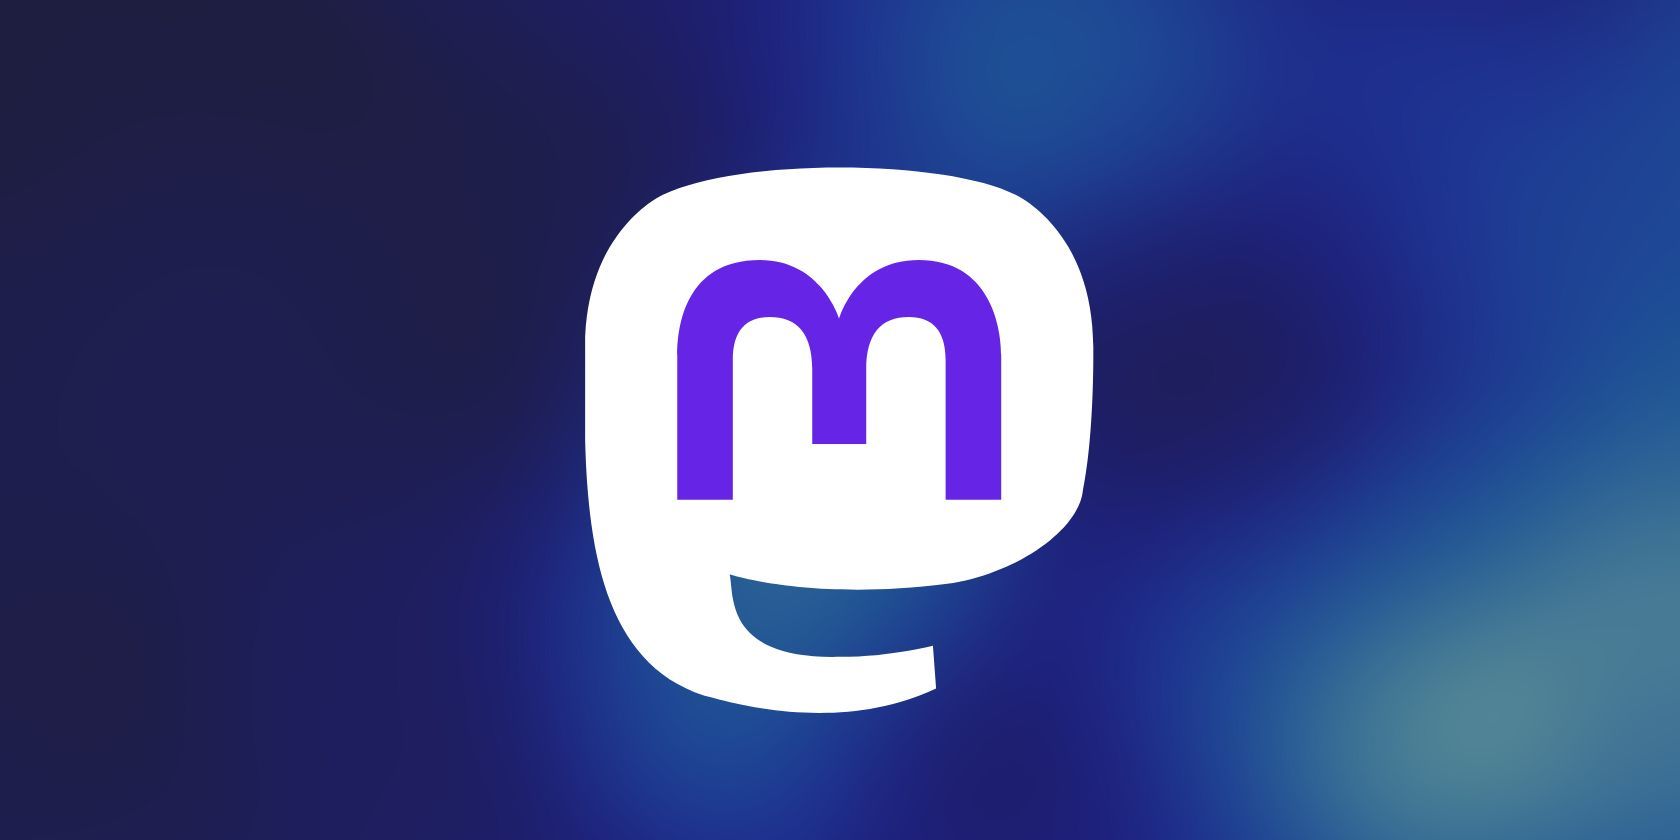 The Mastodon logo appears on a blurred blue background 